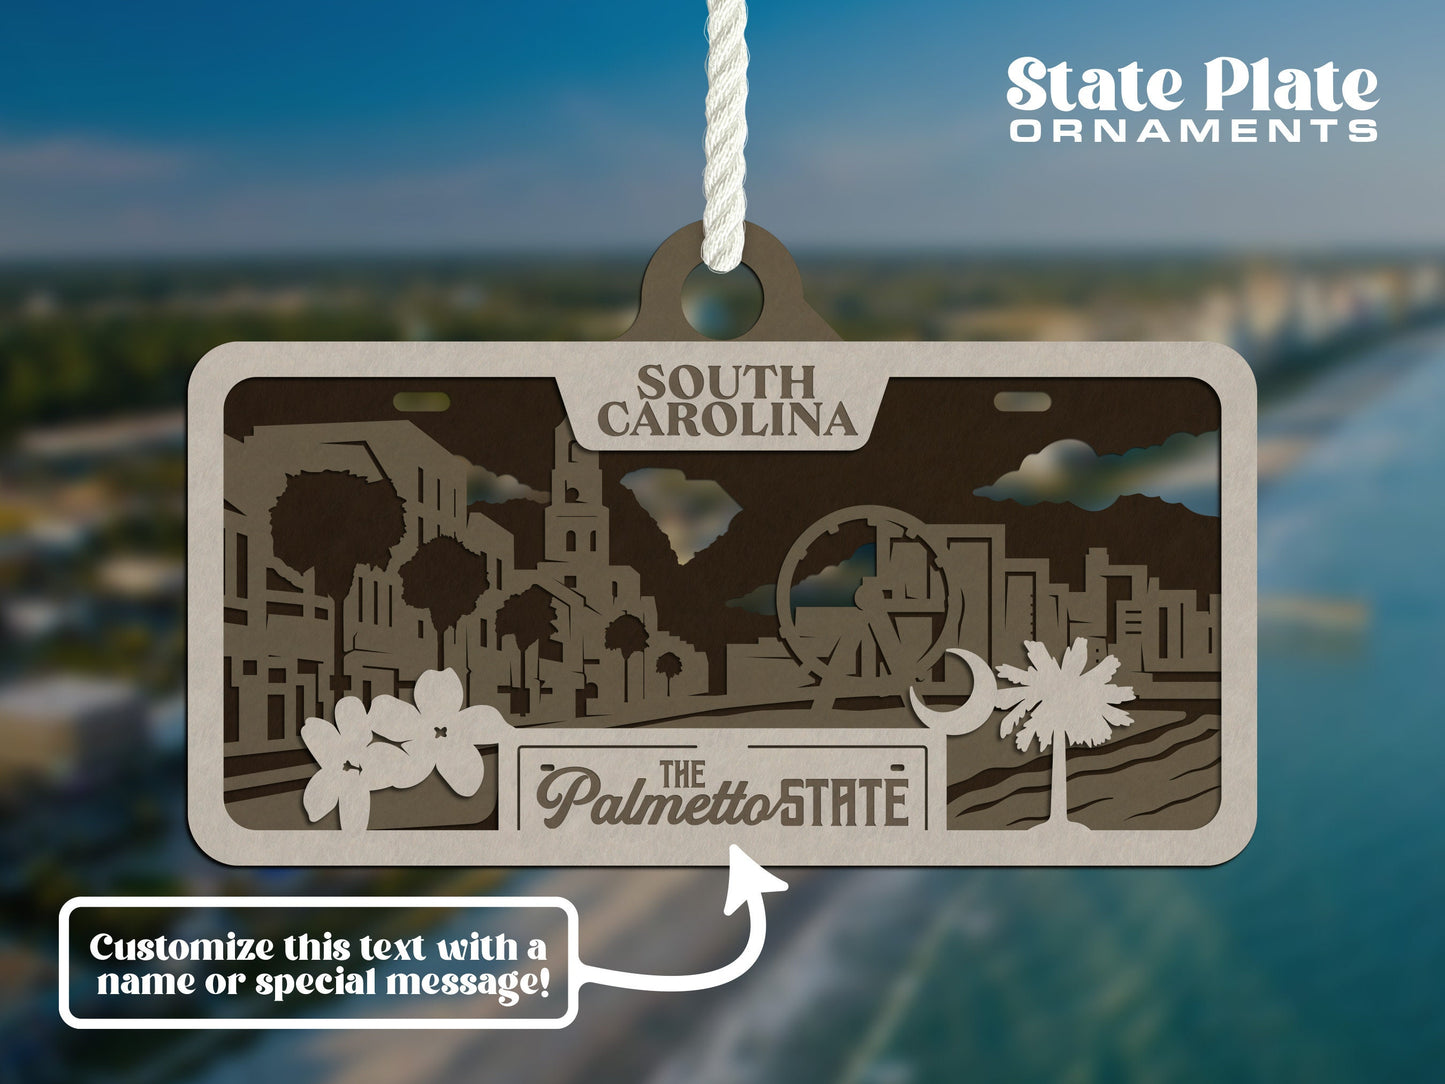 South Carolina State Plate Ornament and Signage - SVG File Download - Sized for Glowforge - Laser Ready Digital Files